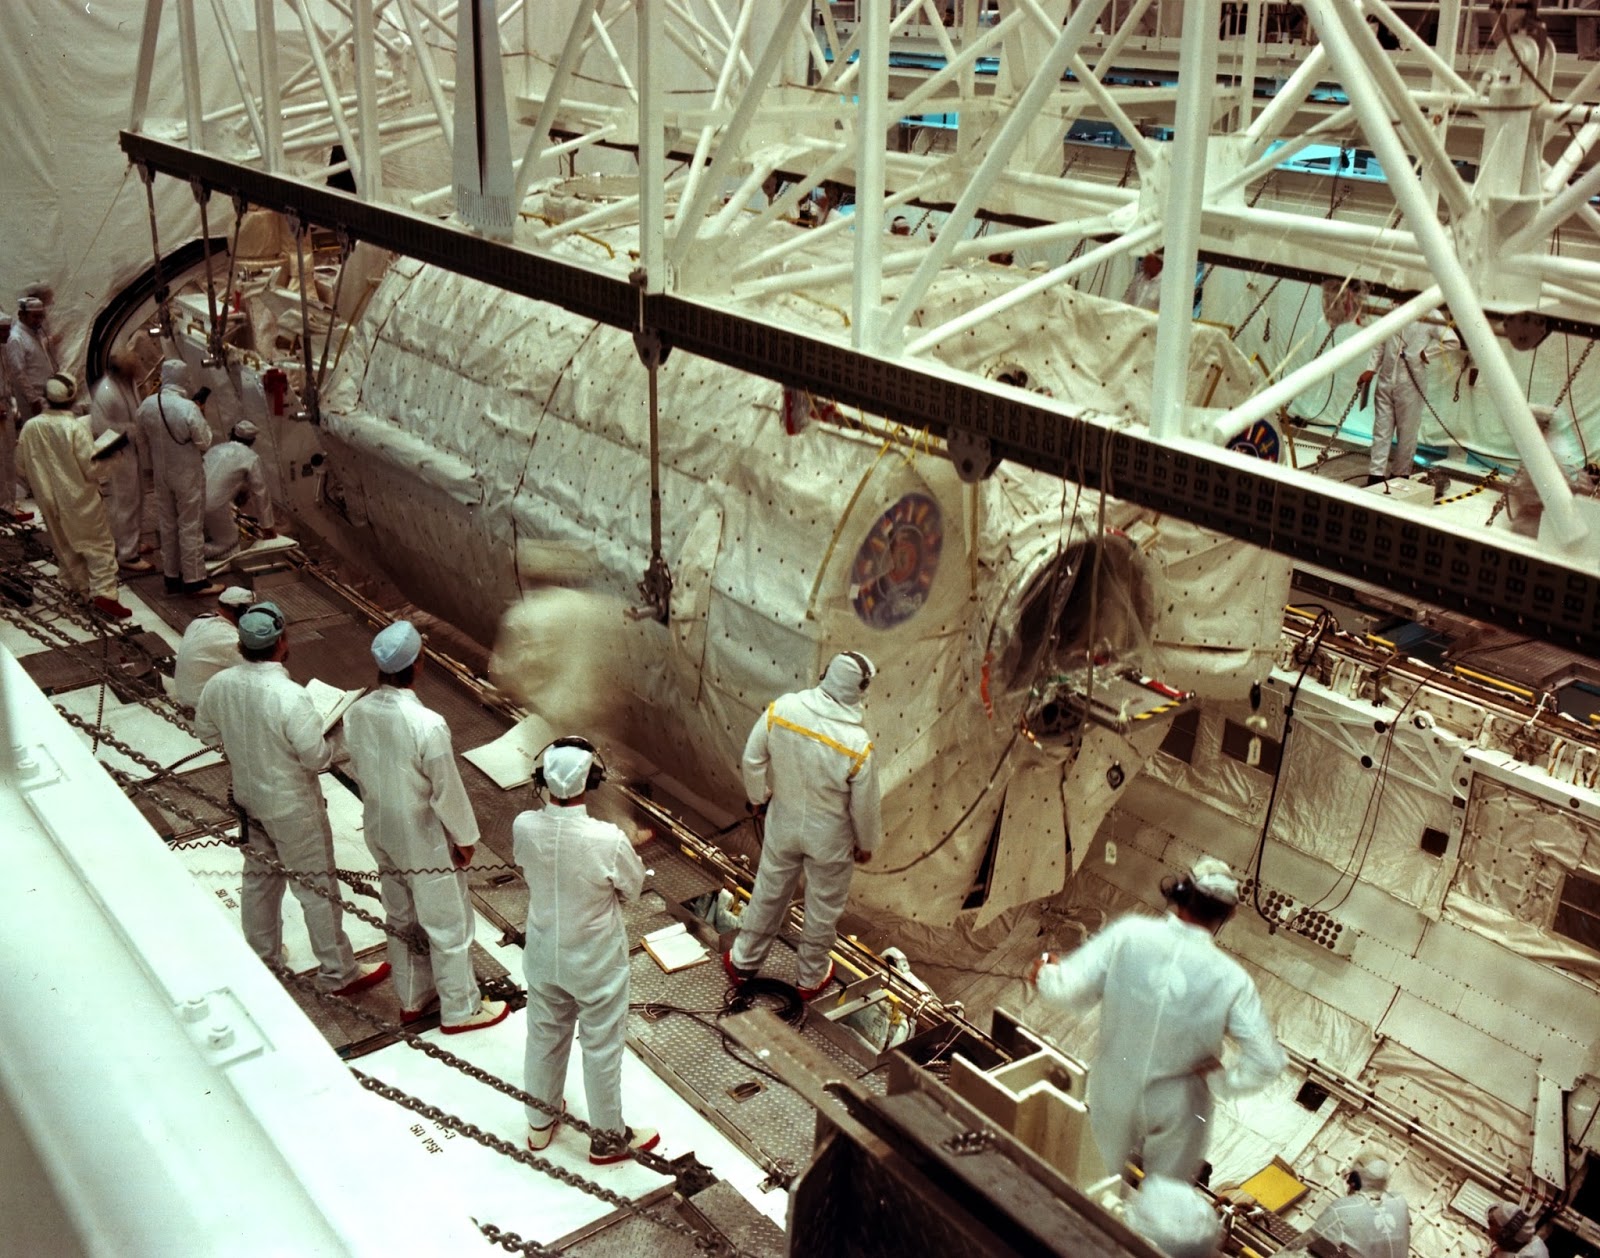 Workers place the Spacelab module and pallet into Columbia’s payload bay in KSC’s Orbiter Processing Facility